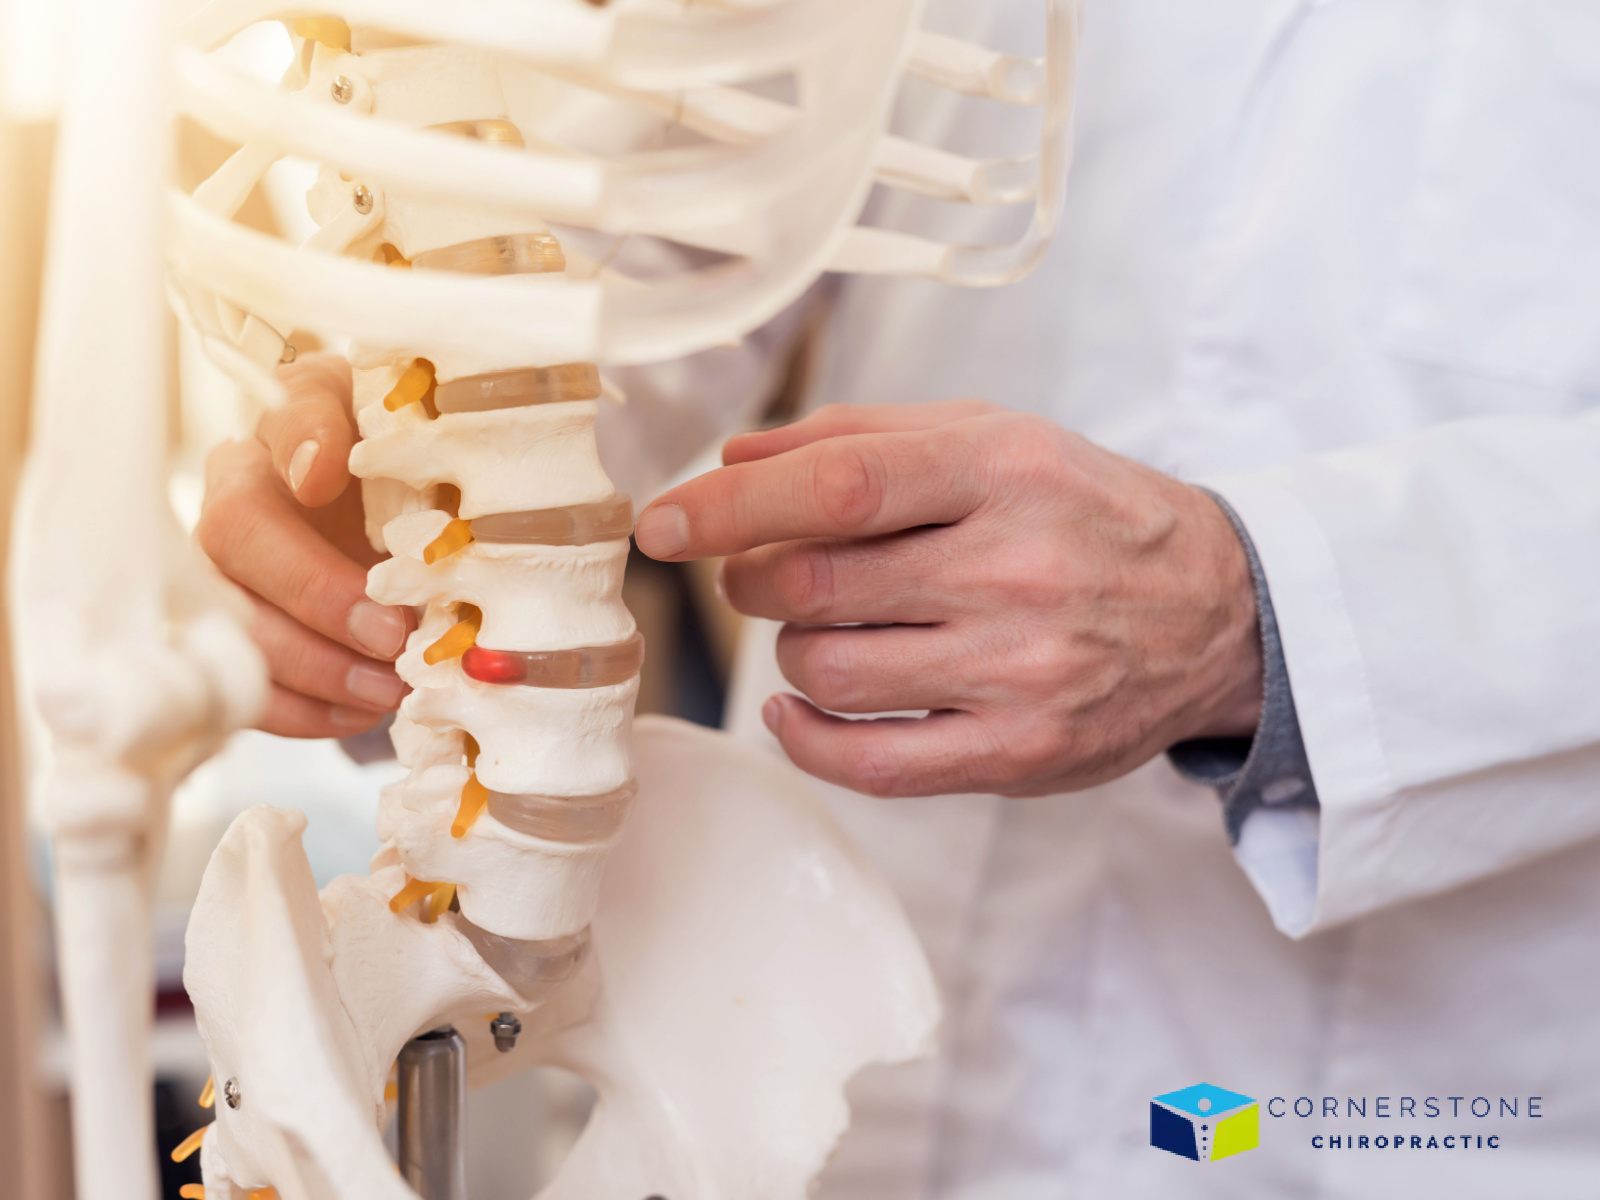 Best Rated Chiropractor Near Snohomish County, WA